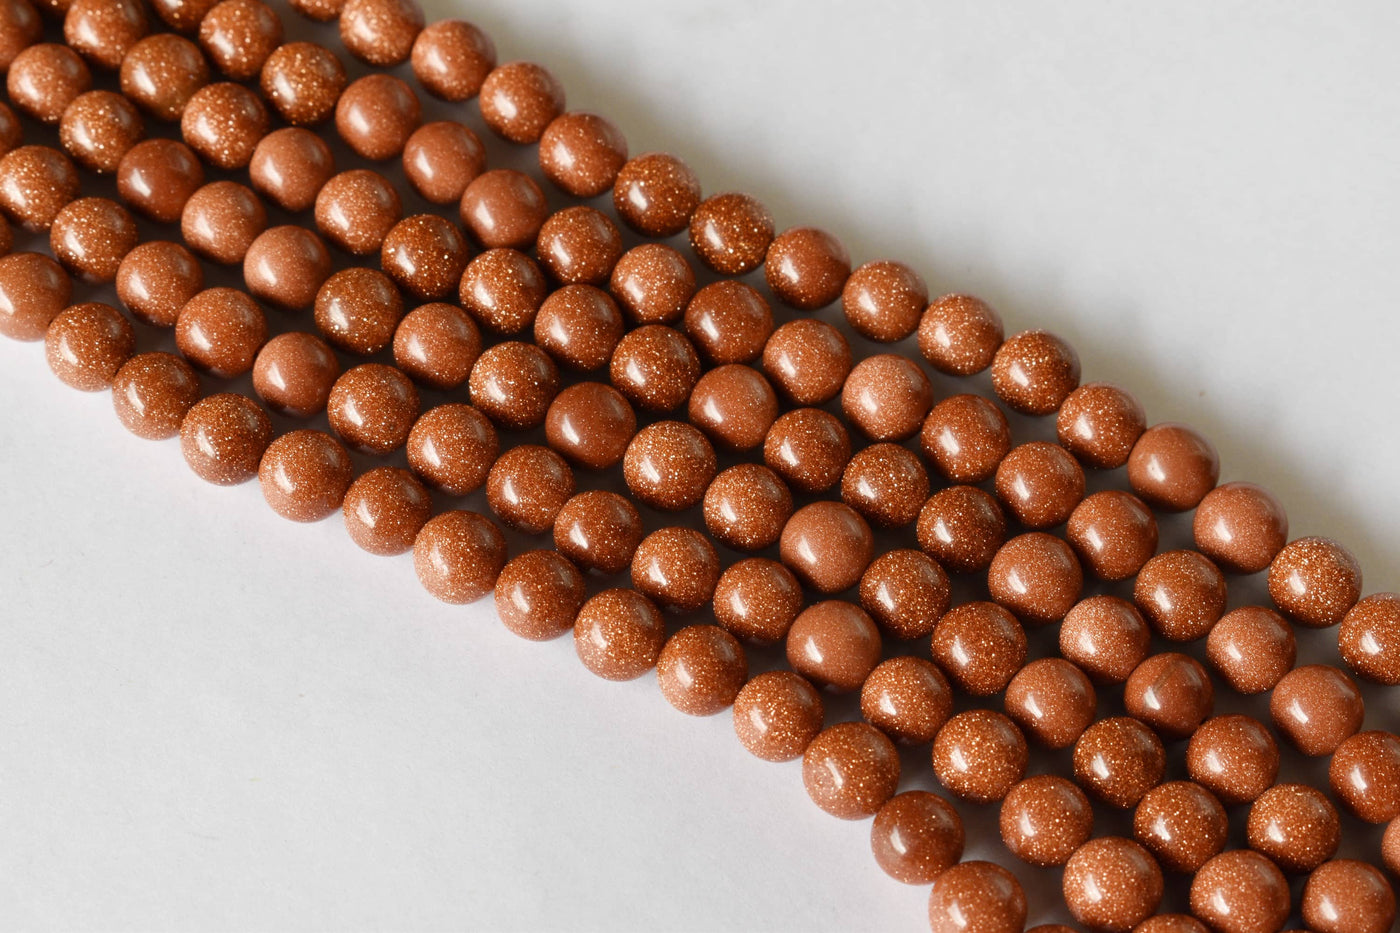 Red Sandstone Beads, Natural Round Crystal Beads 4mm to 12mm